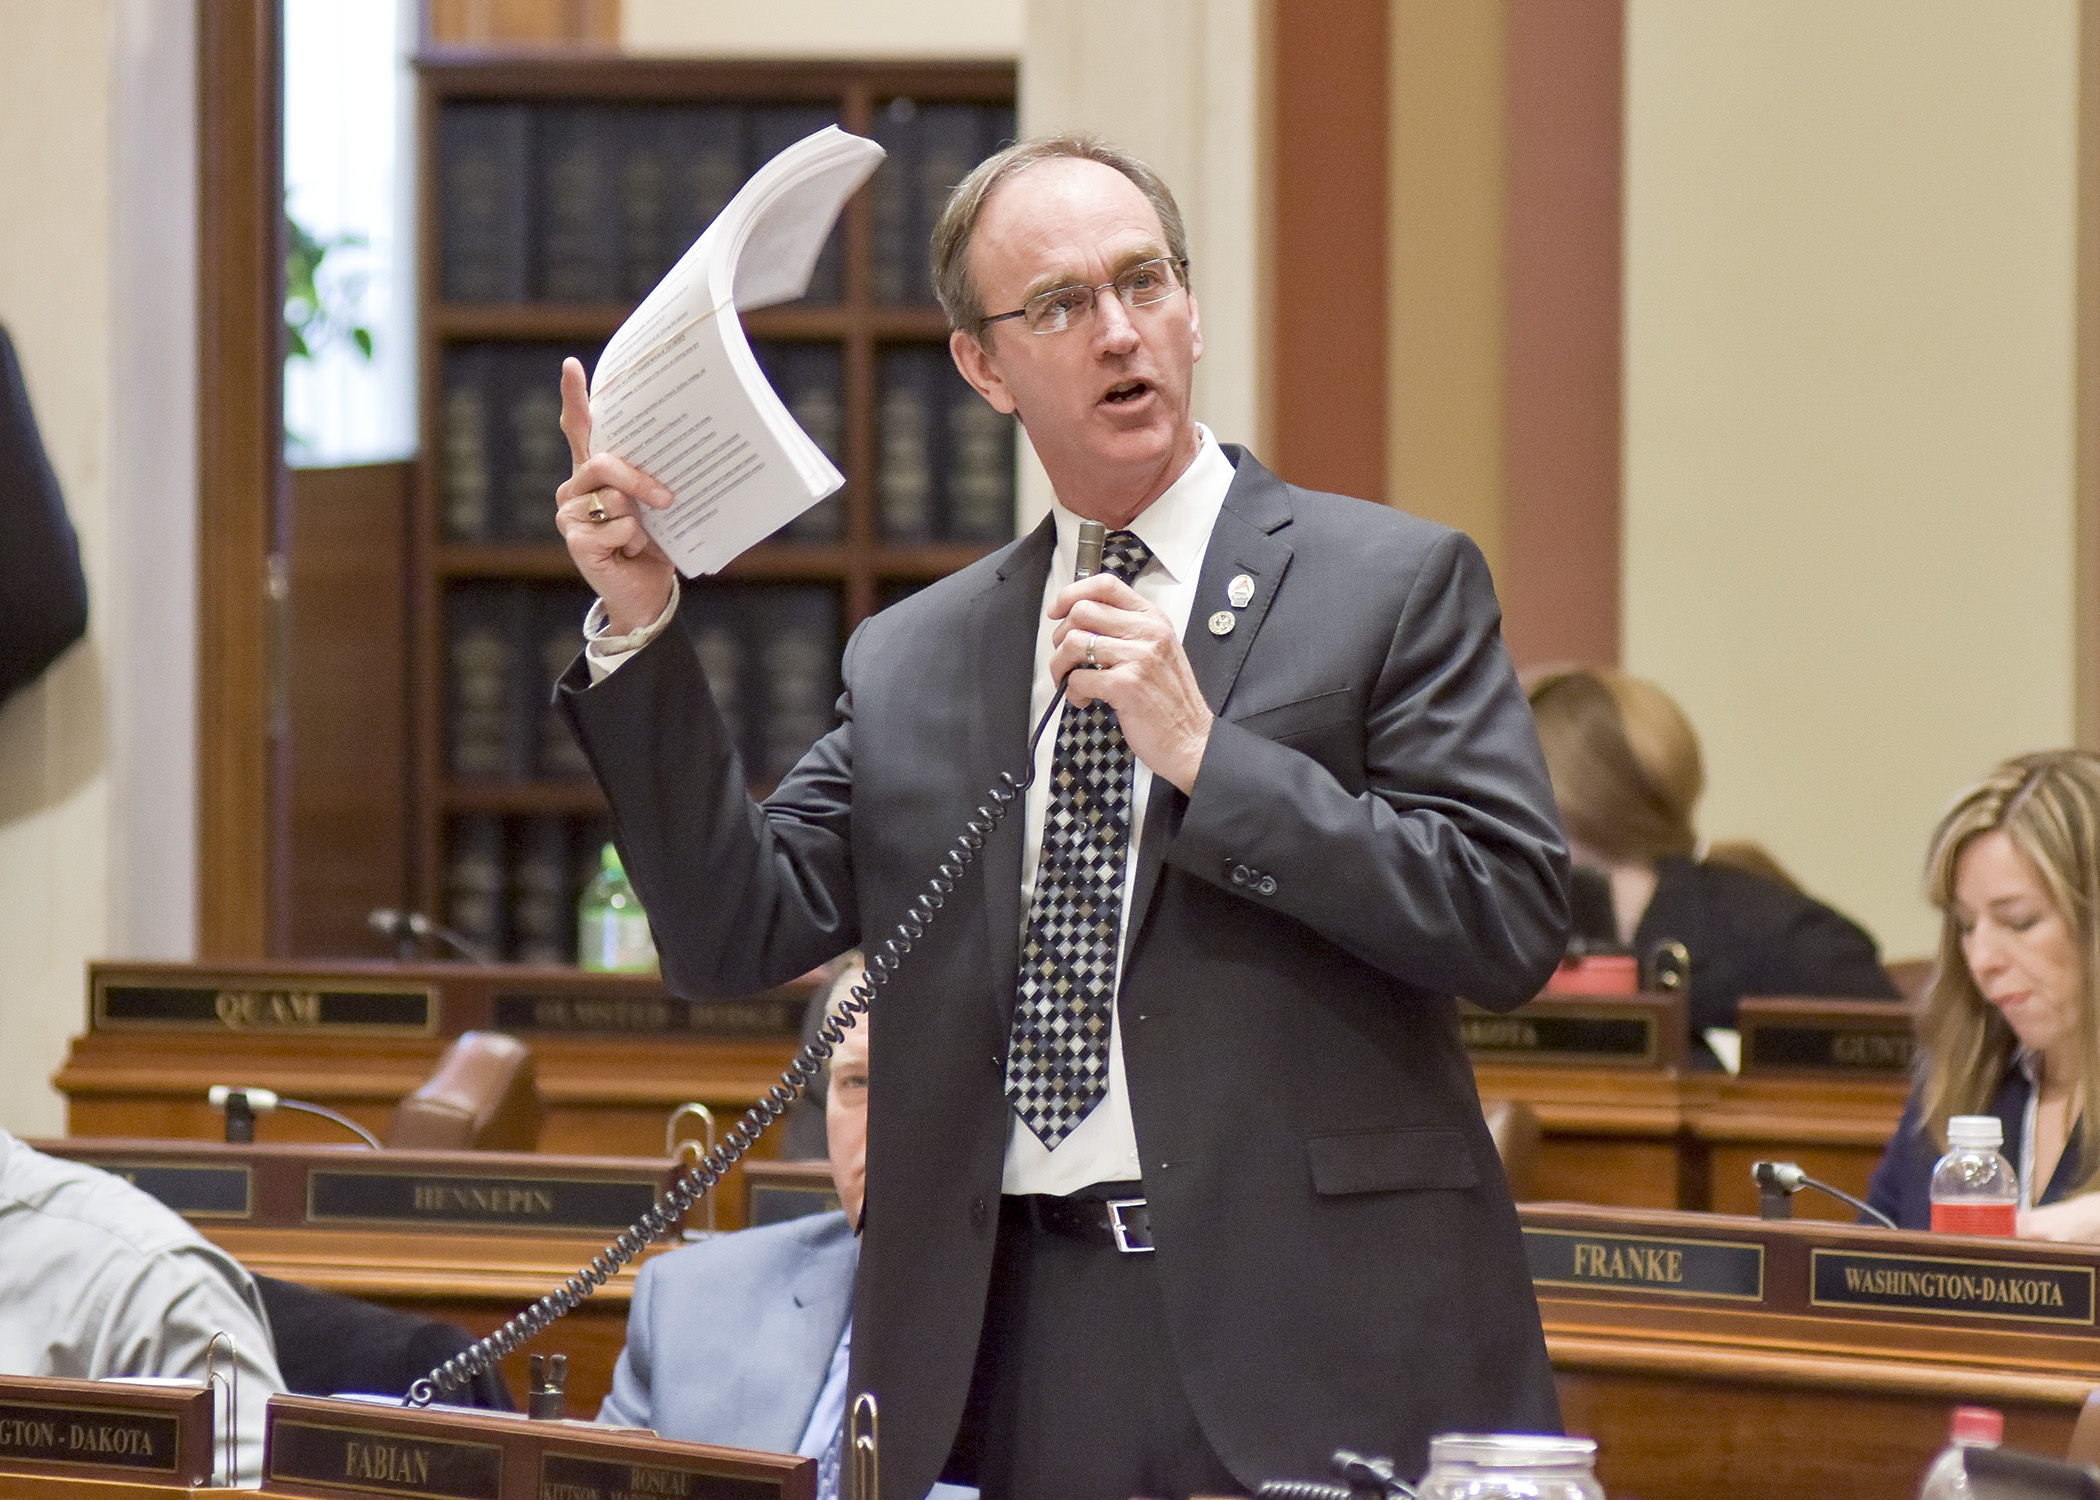 Rep. Dan Fabian presents the omnibus environment and natural resources bill on the House Floor March 30. Photo by Andrew VonBank